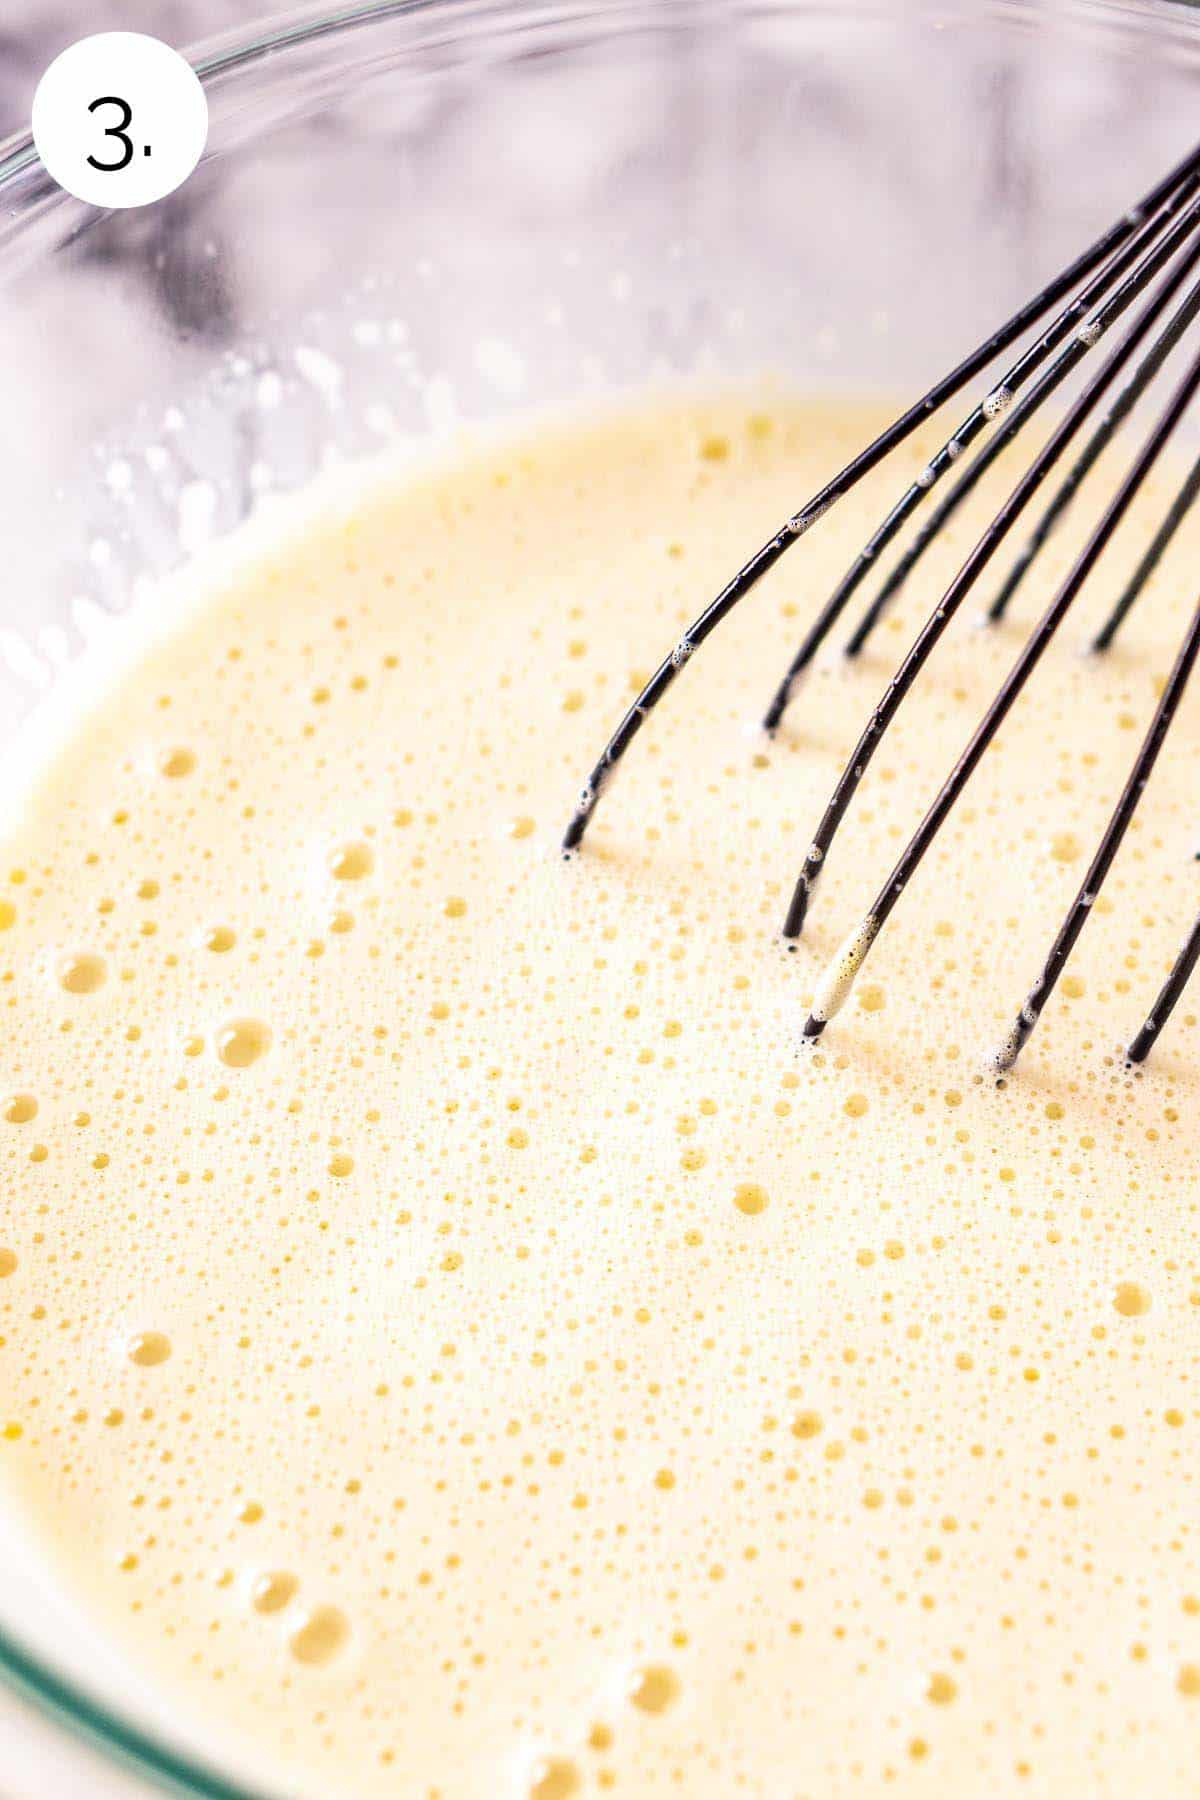 Whisking the egg yolks and cream mixture together in a large glass mixing bowl.